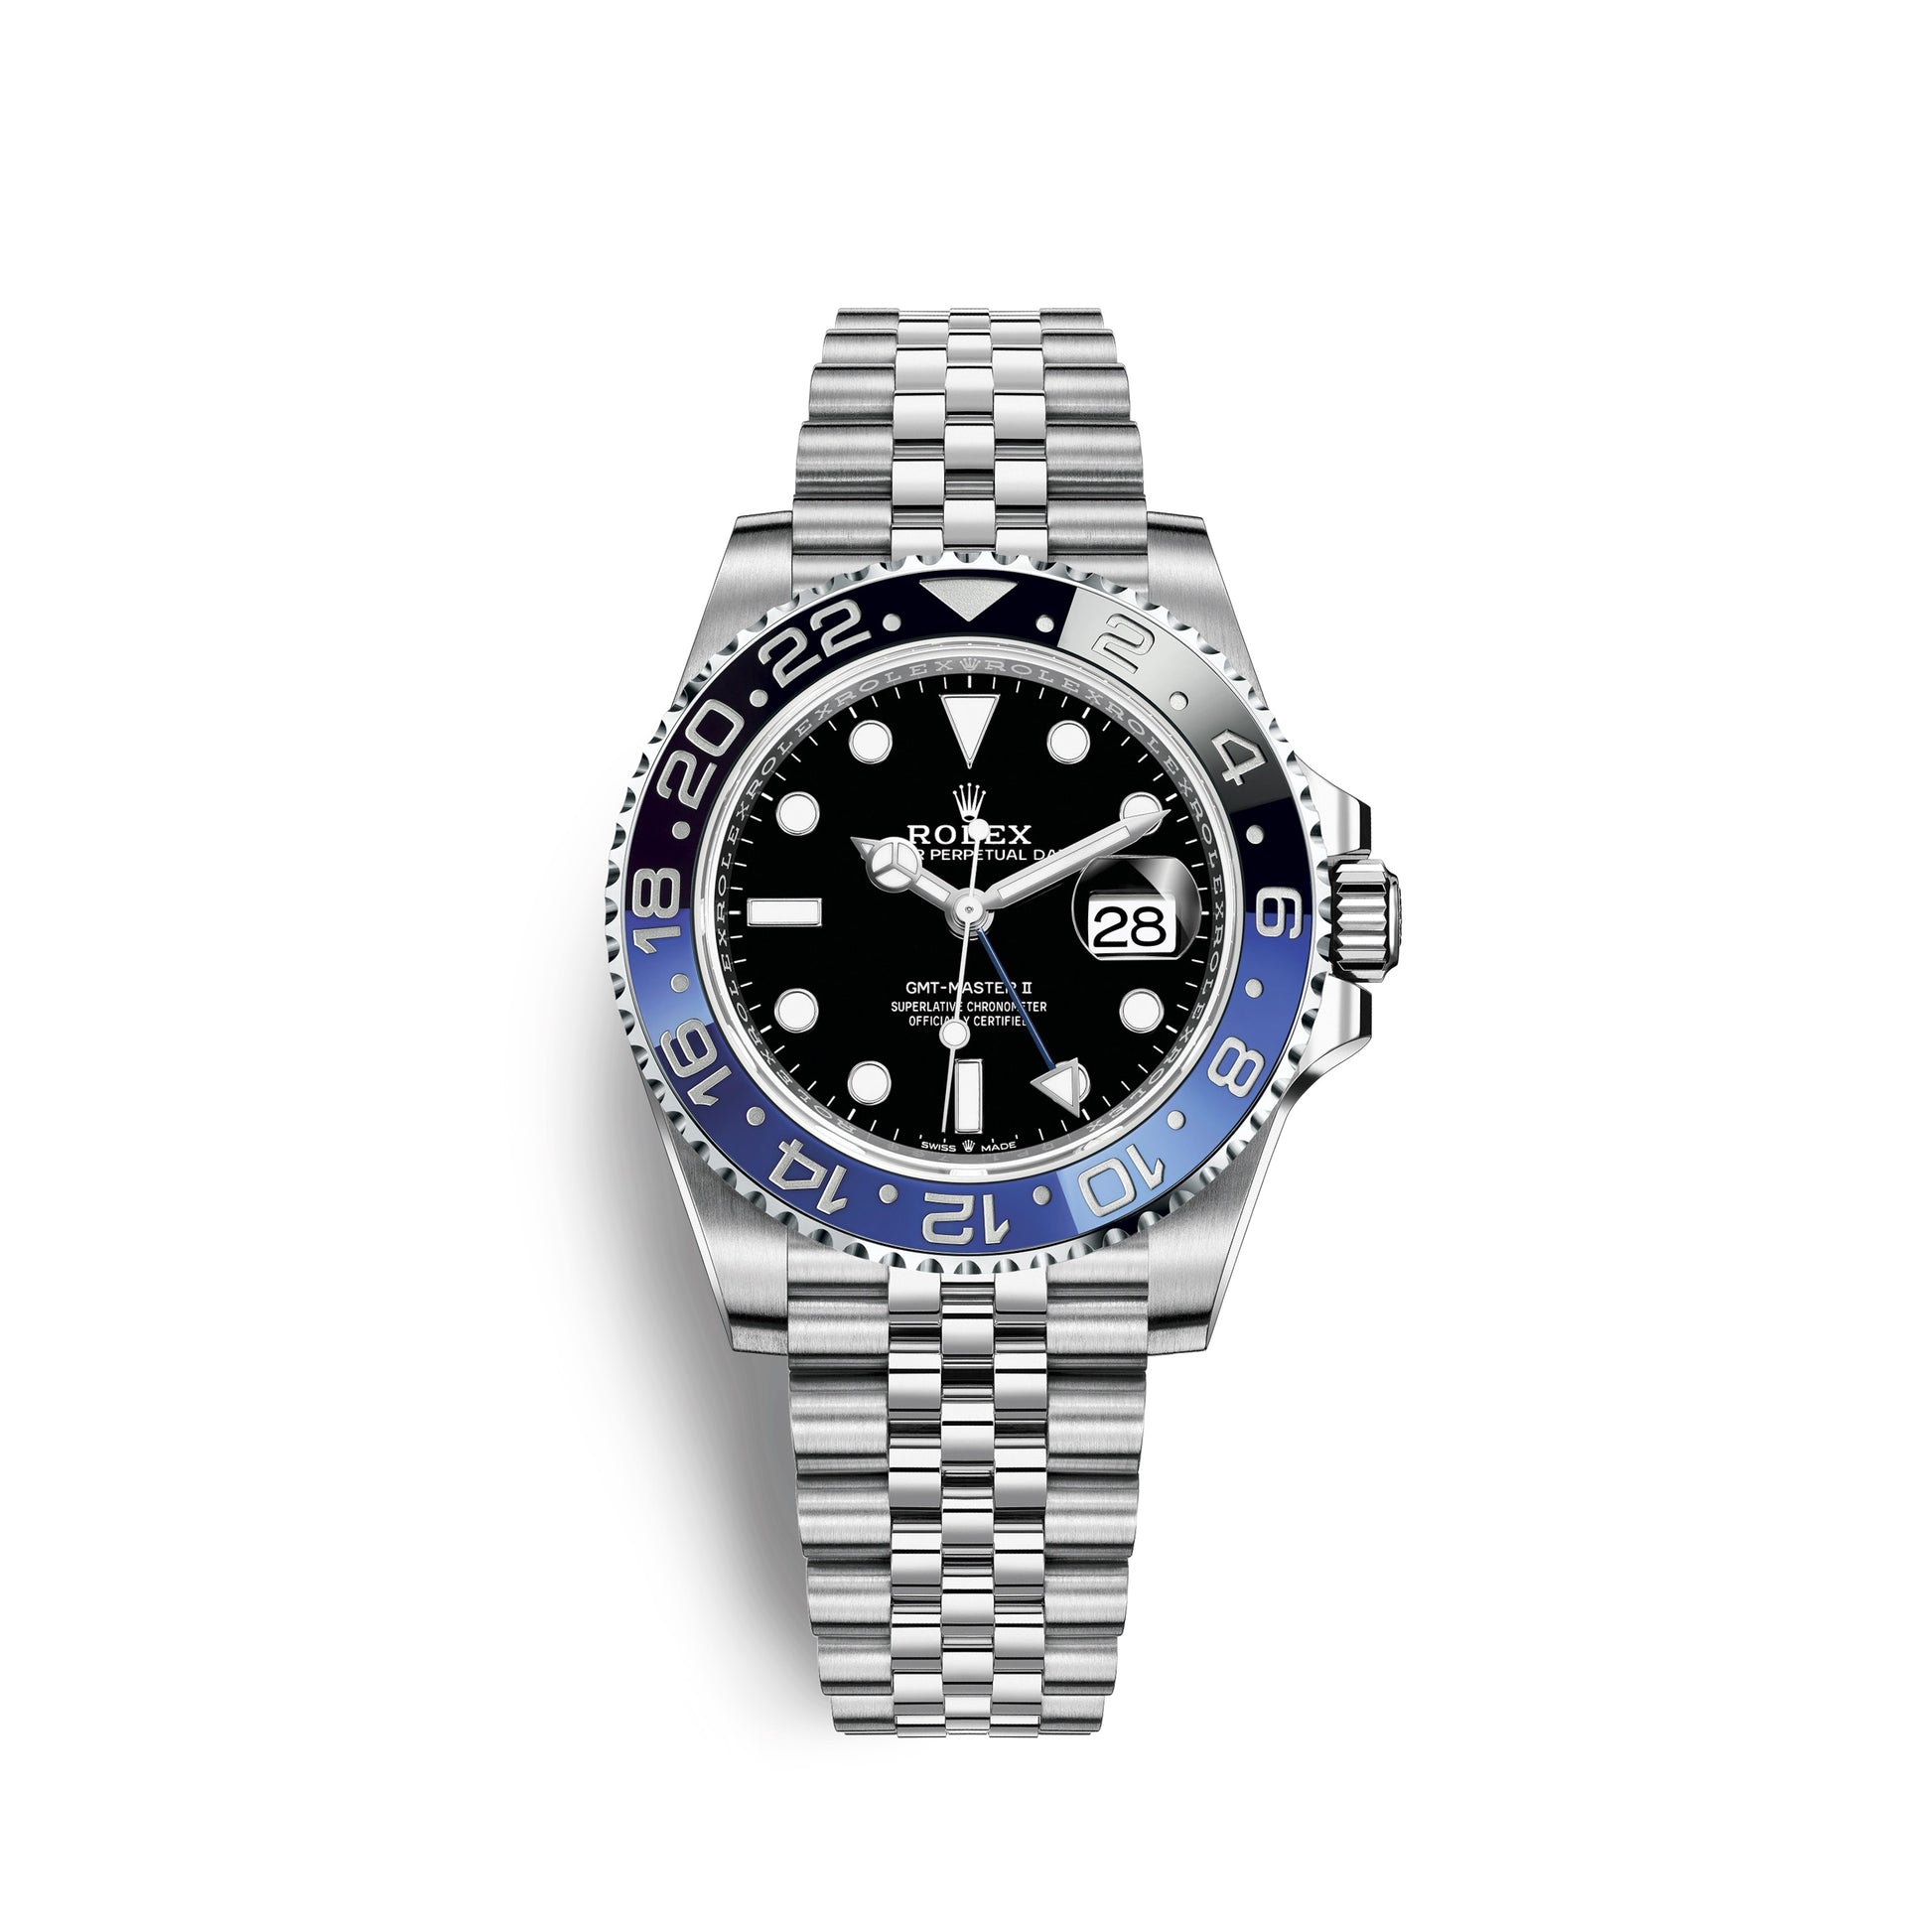 Præsident Akkumulerede Airfield Rolex GMT-Master II, Stainless steel, 40mm, Ref# 126710blnr-0002 –  Affordable Swiss Watches Inc.